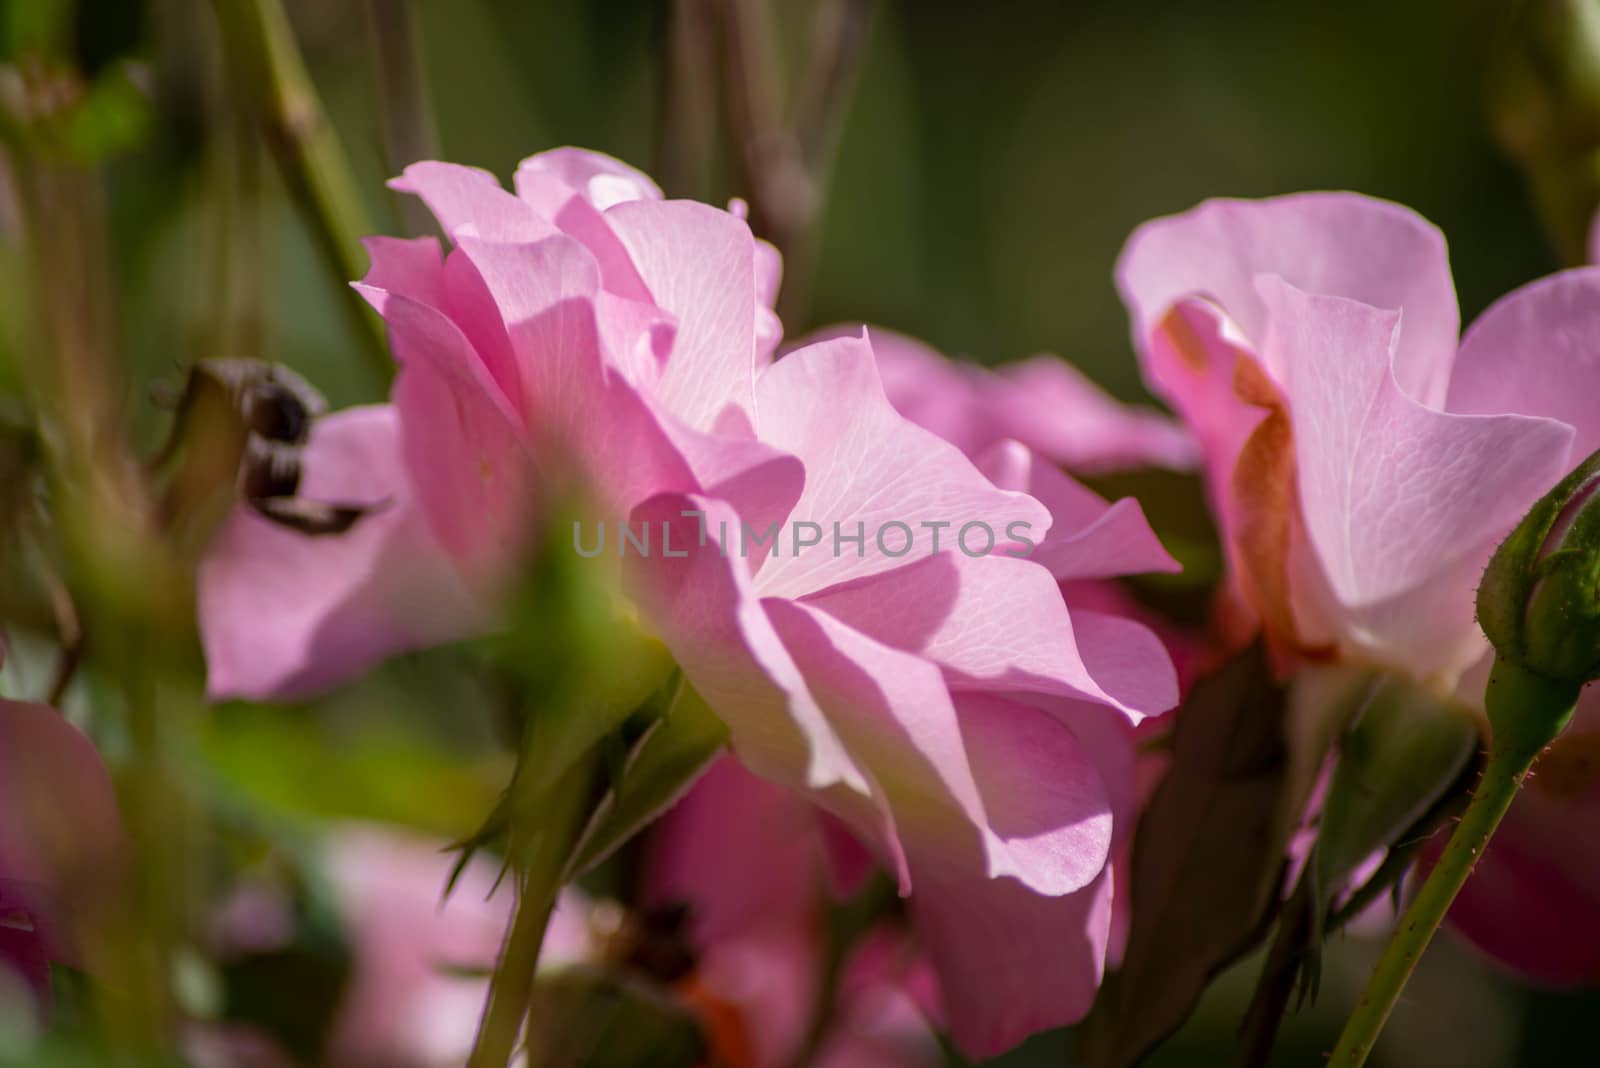 Abstract pink rose selective focus, bokeh background, petal text by marysalen